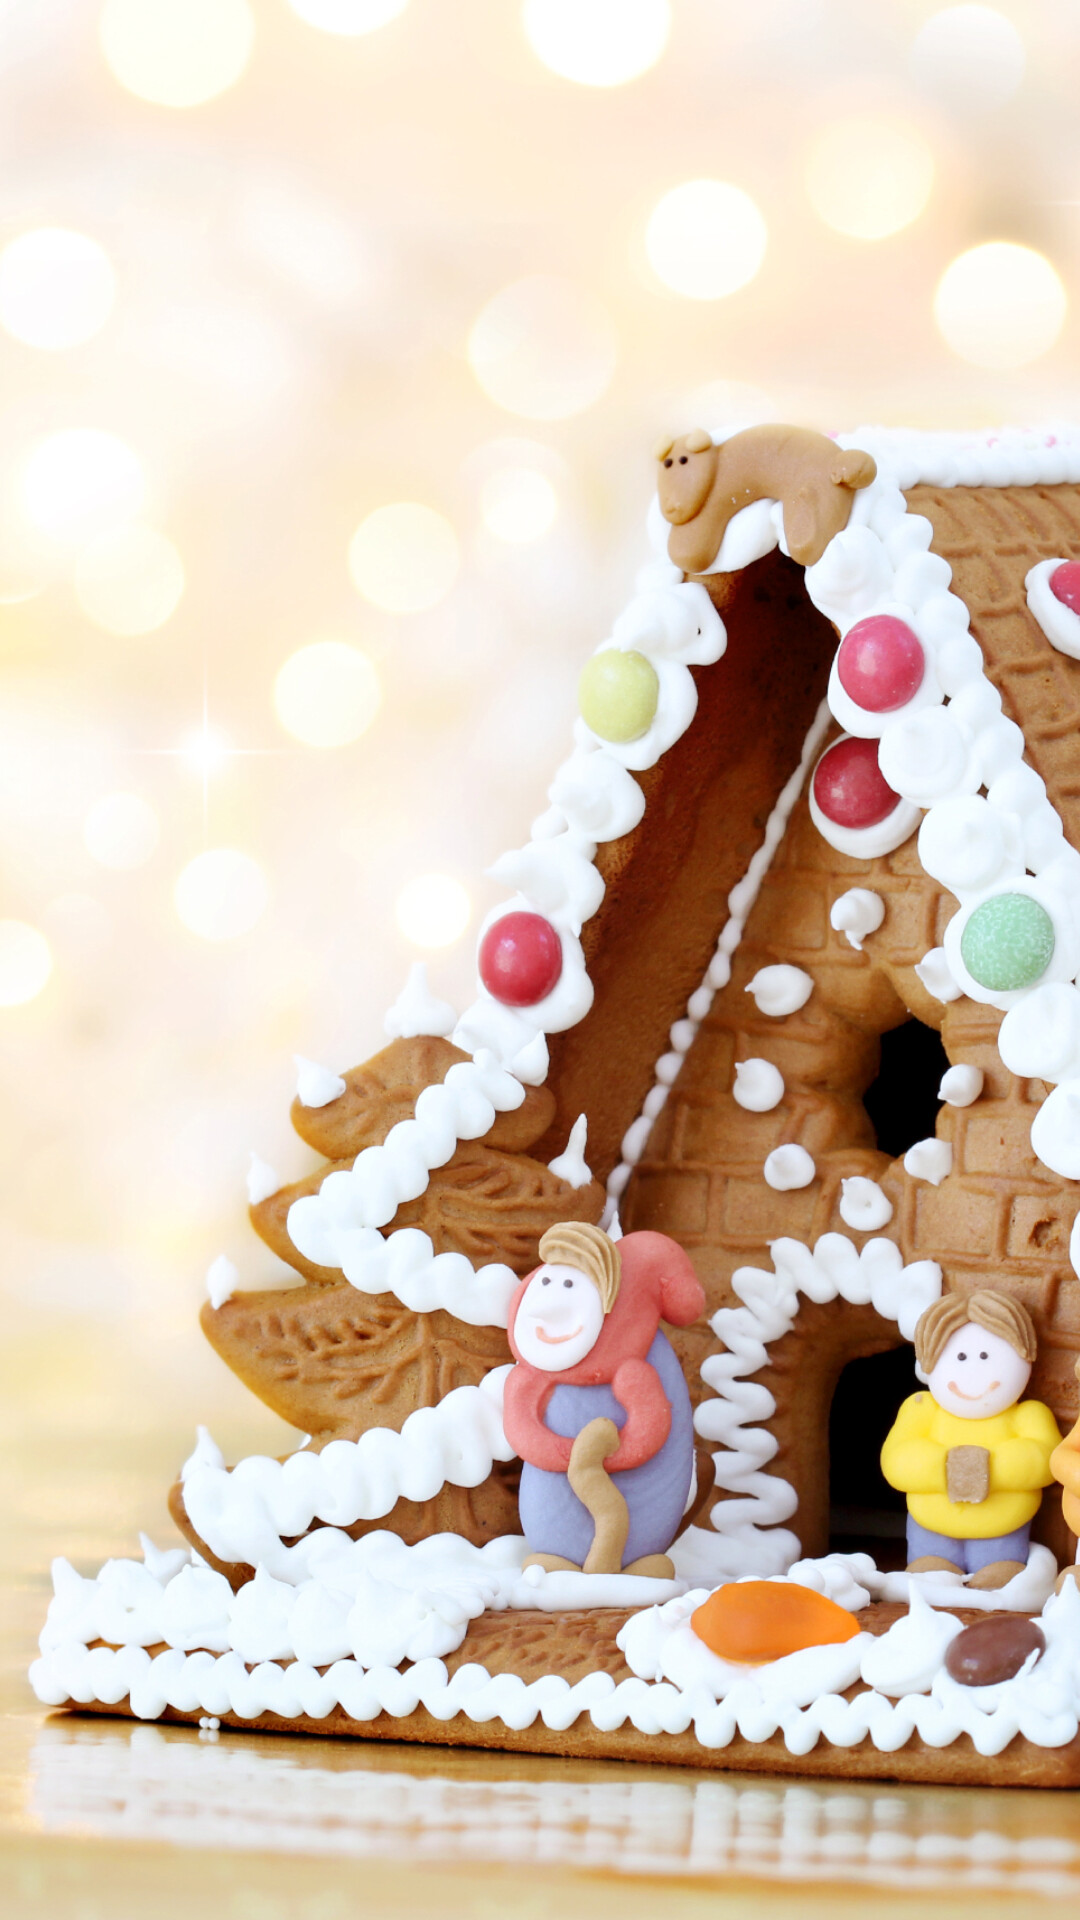 Gingerbread house, Festive joy, Sweet delight, Holiday happiness, 1080x1920 Full HD Phone